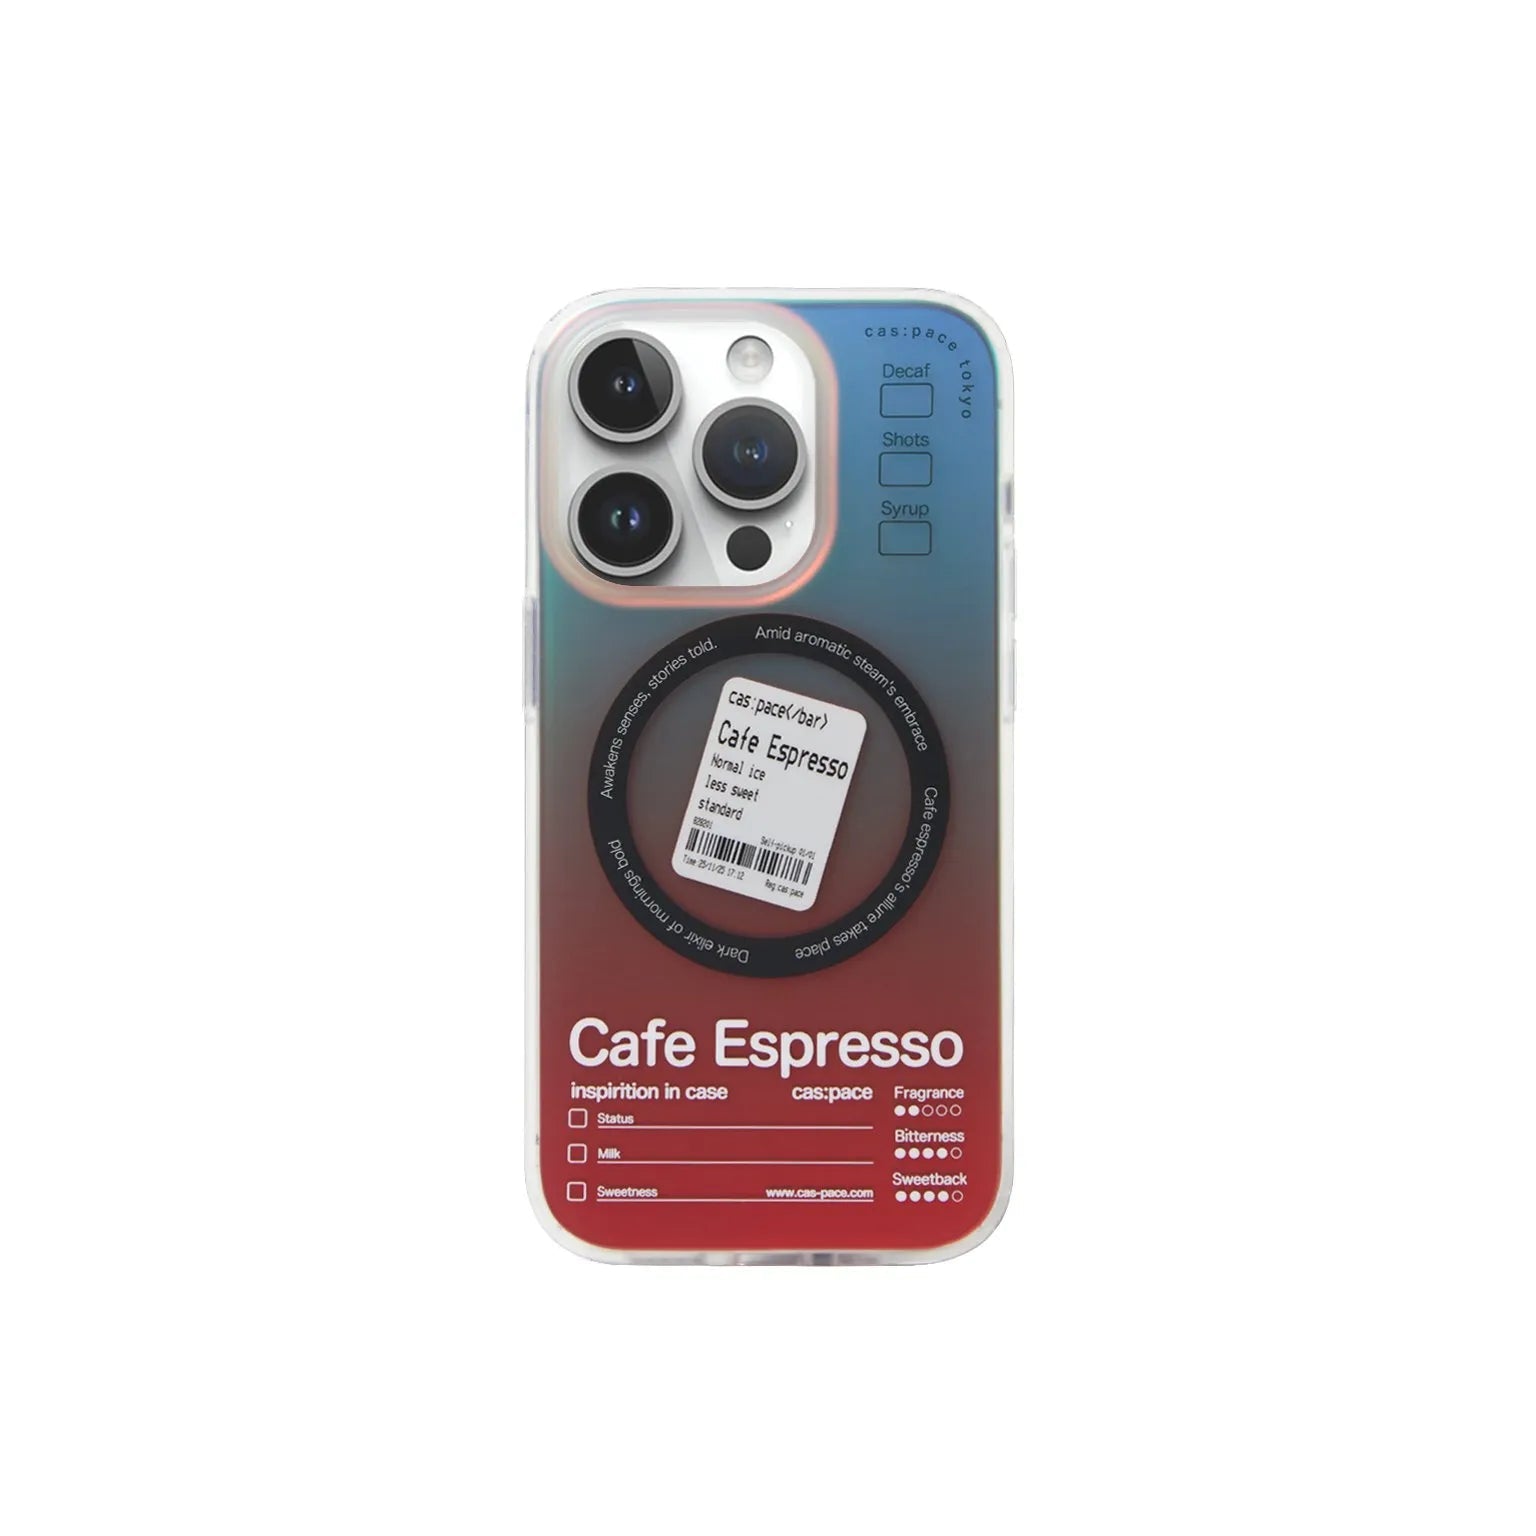 cas:pace collection「espresso」MagSafe対応携帯ケース - cas:pace 殼空間